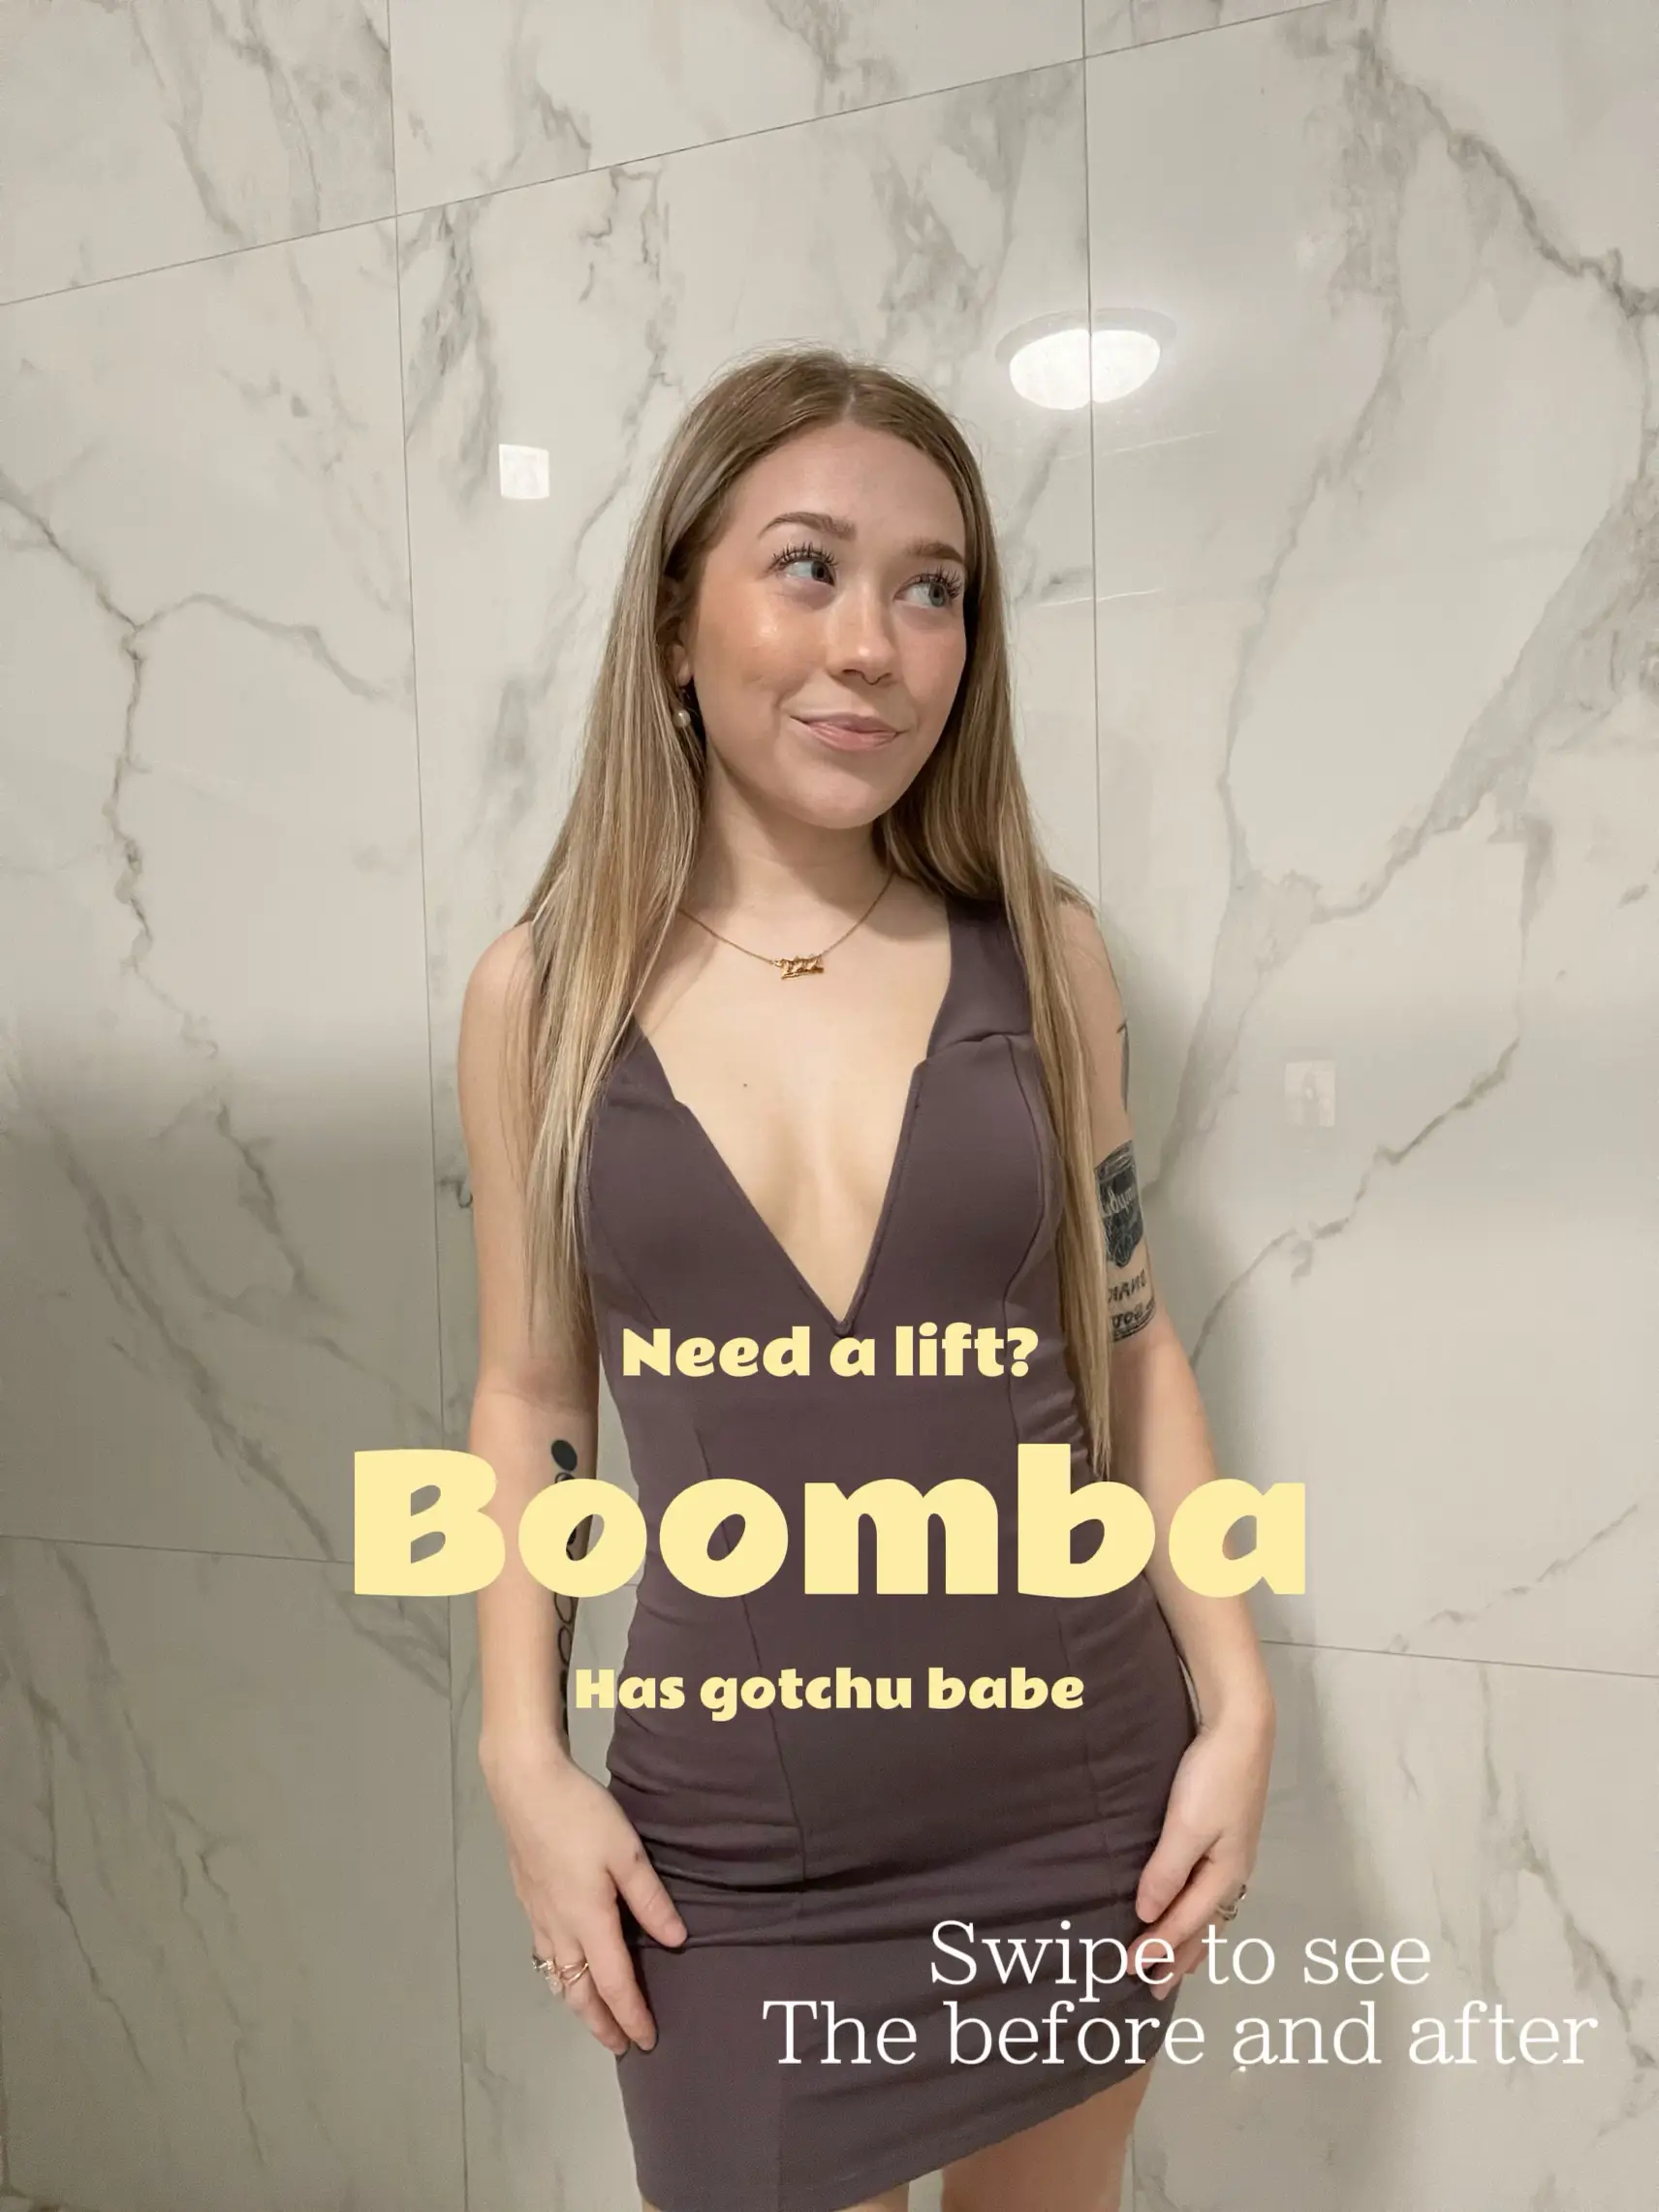 The power of BOOMBA inserts 😍 get a fuller shape without having